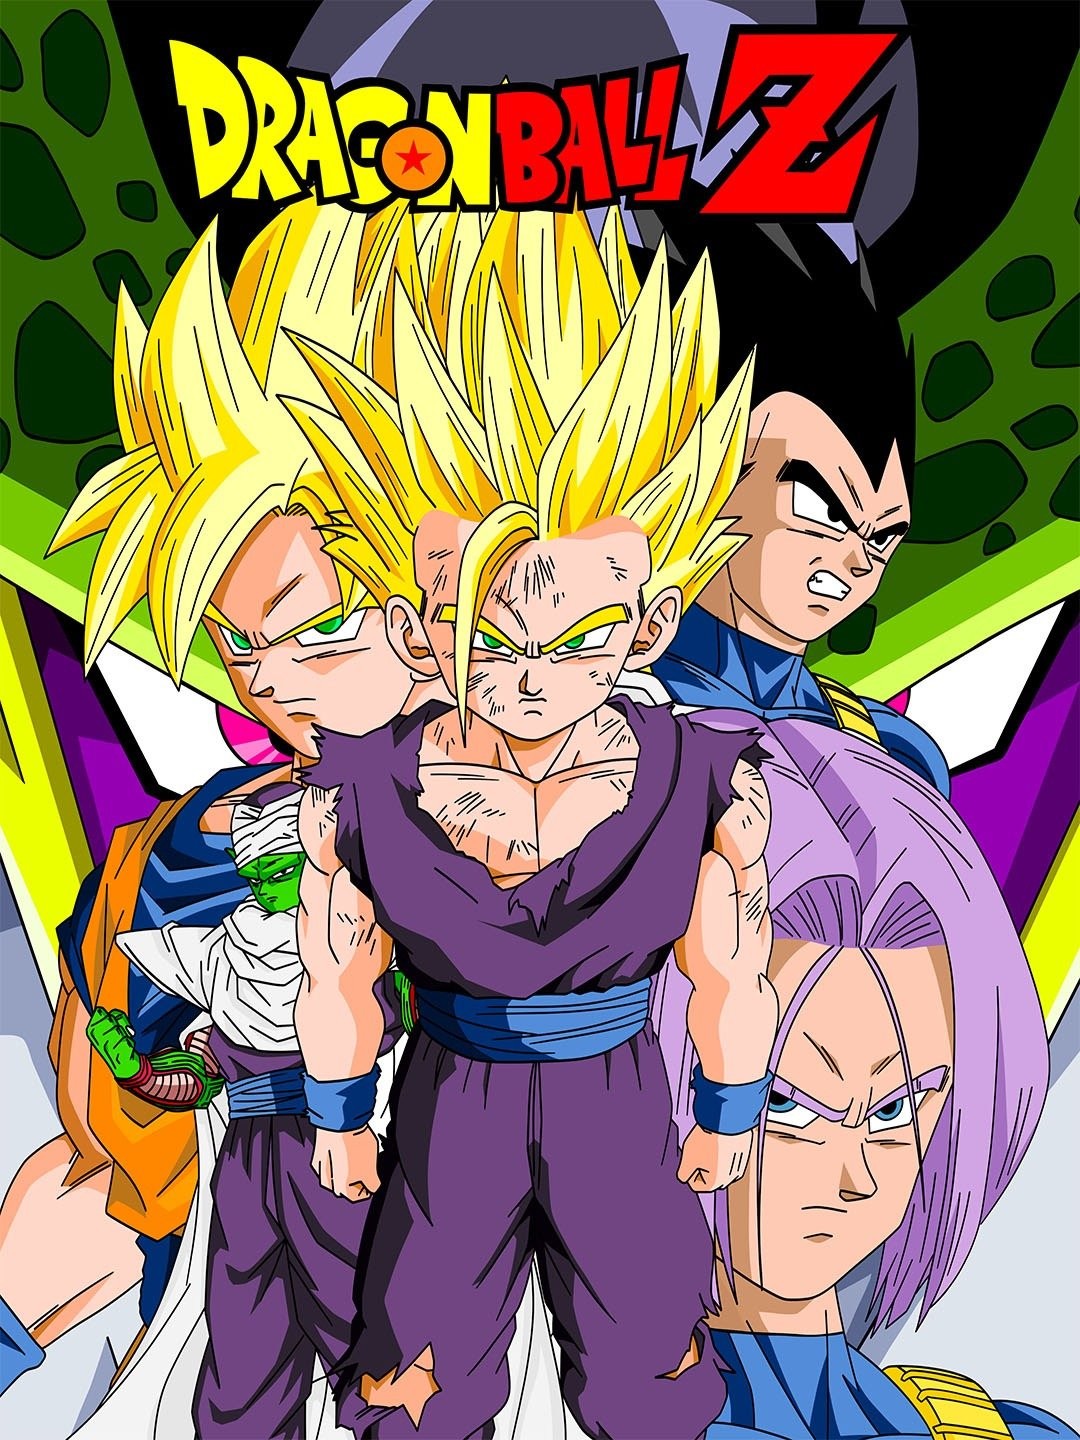 Dragon Ball Z Coolers Revenge Anime Film to Air on Cartoon Network